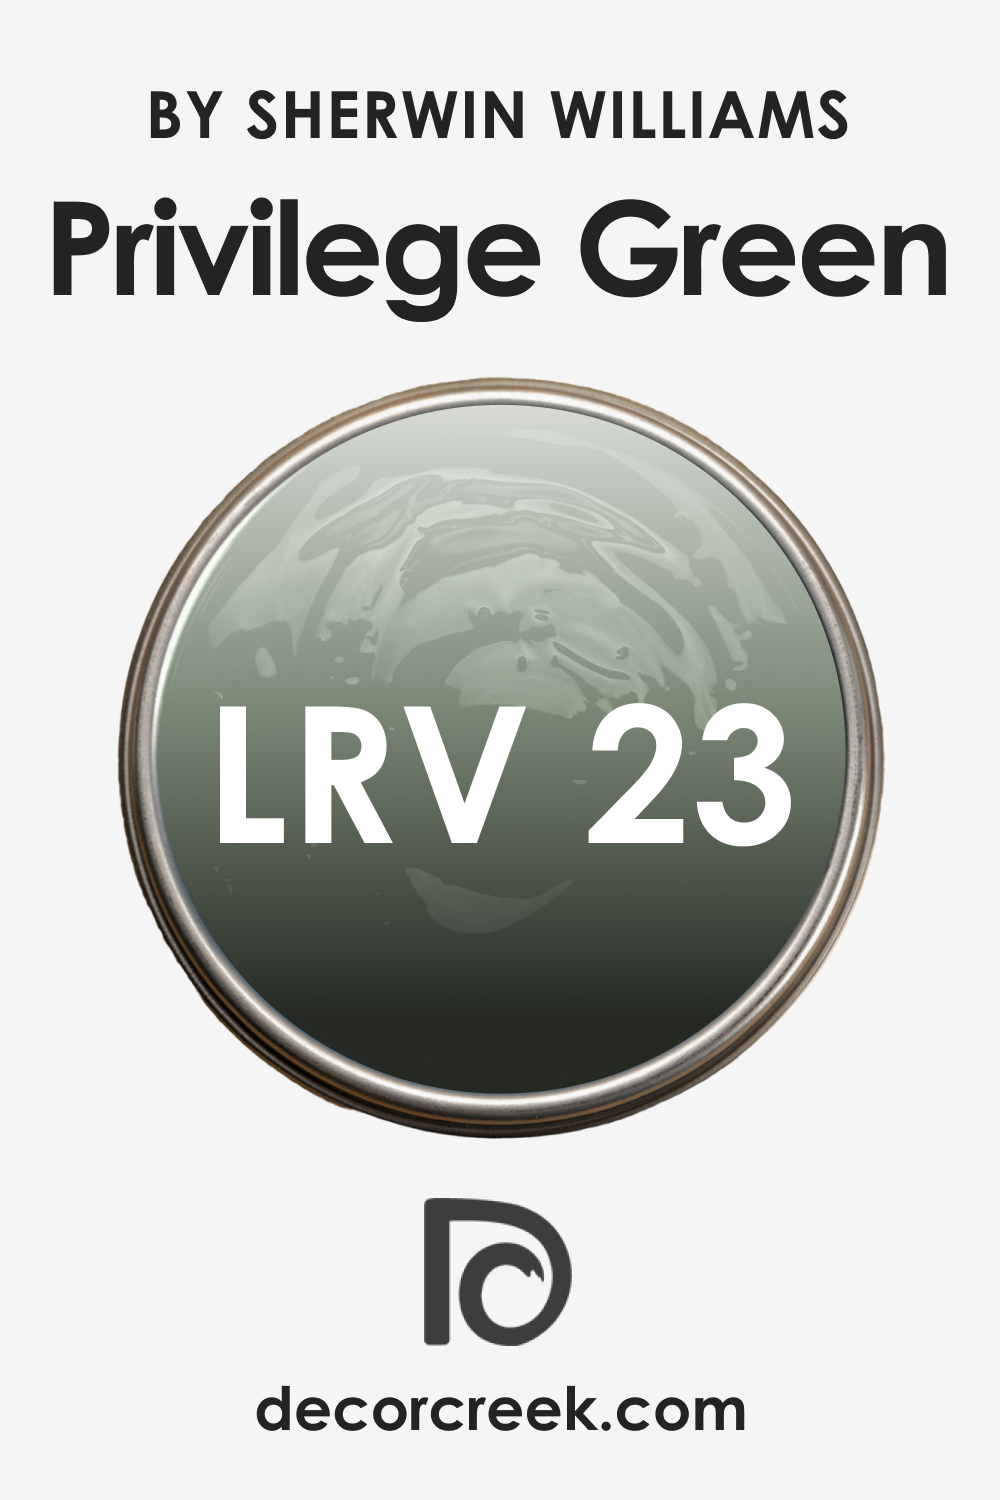 What LRV Does Privilege Green SW 6193 Have?